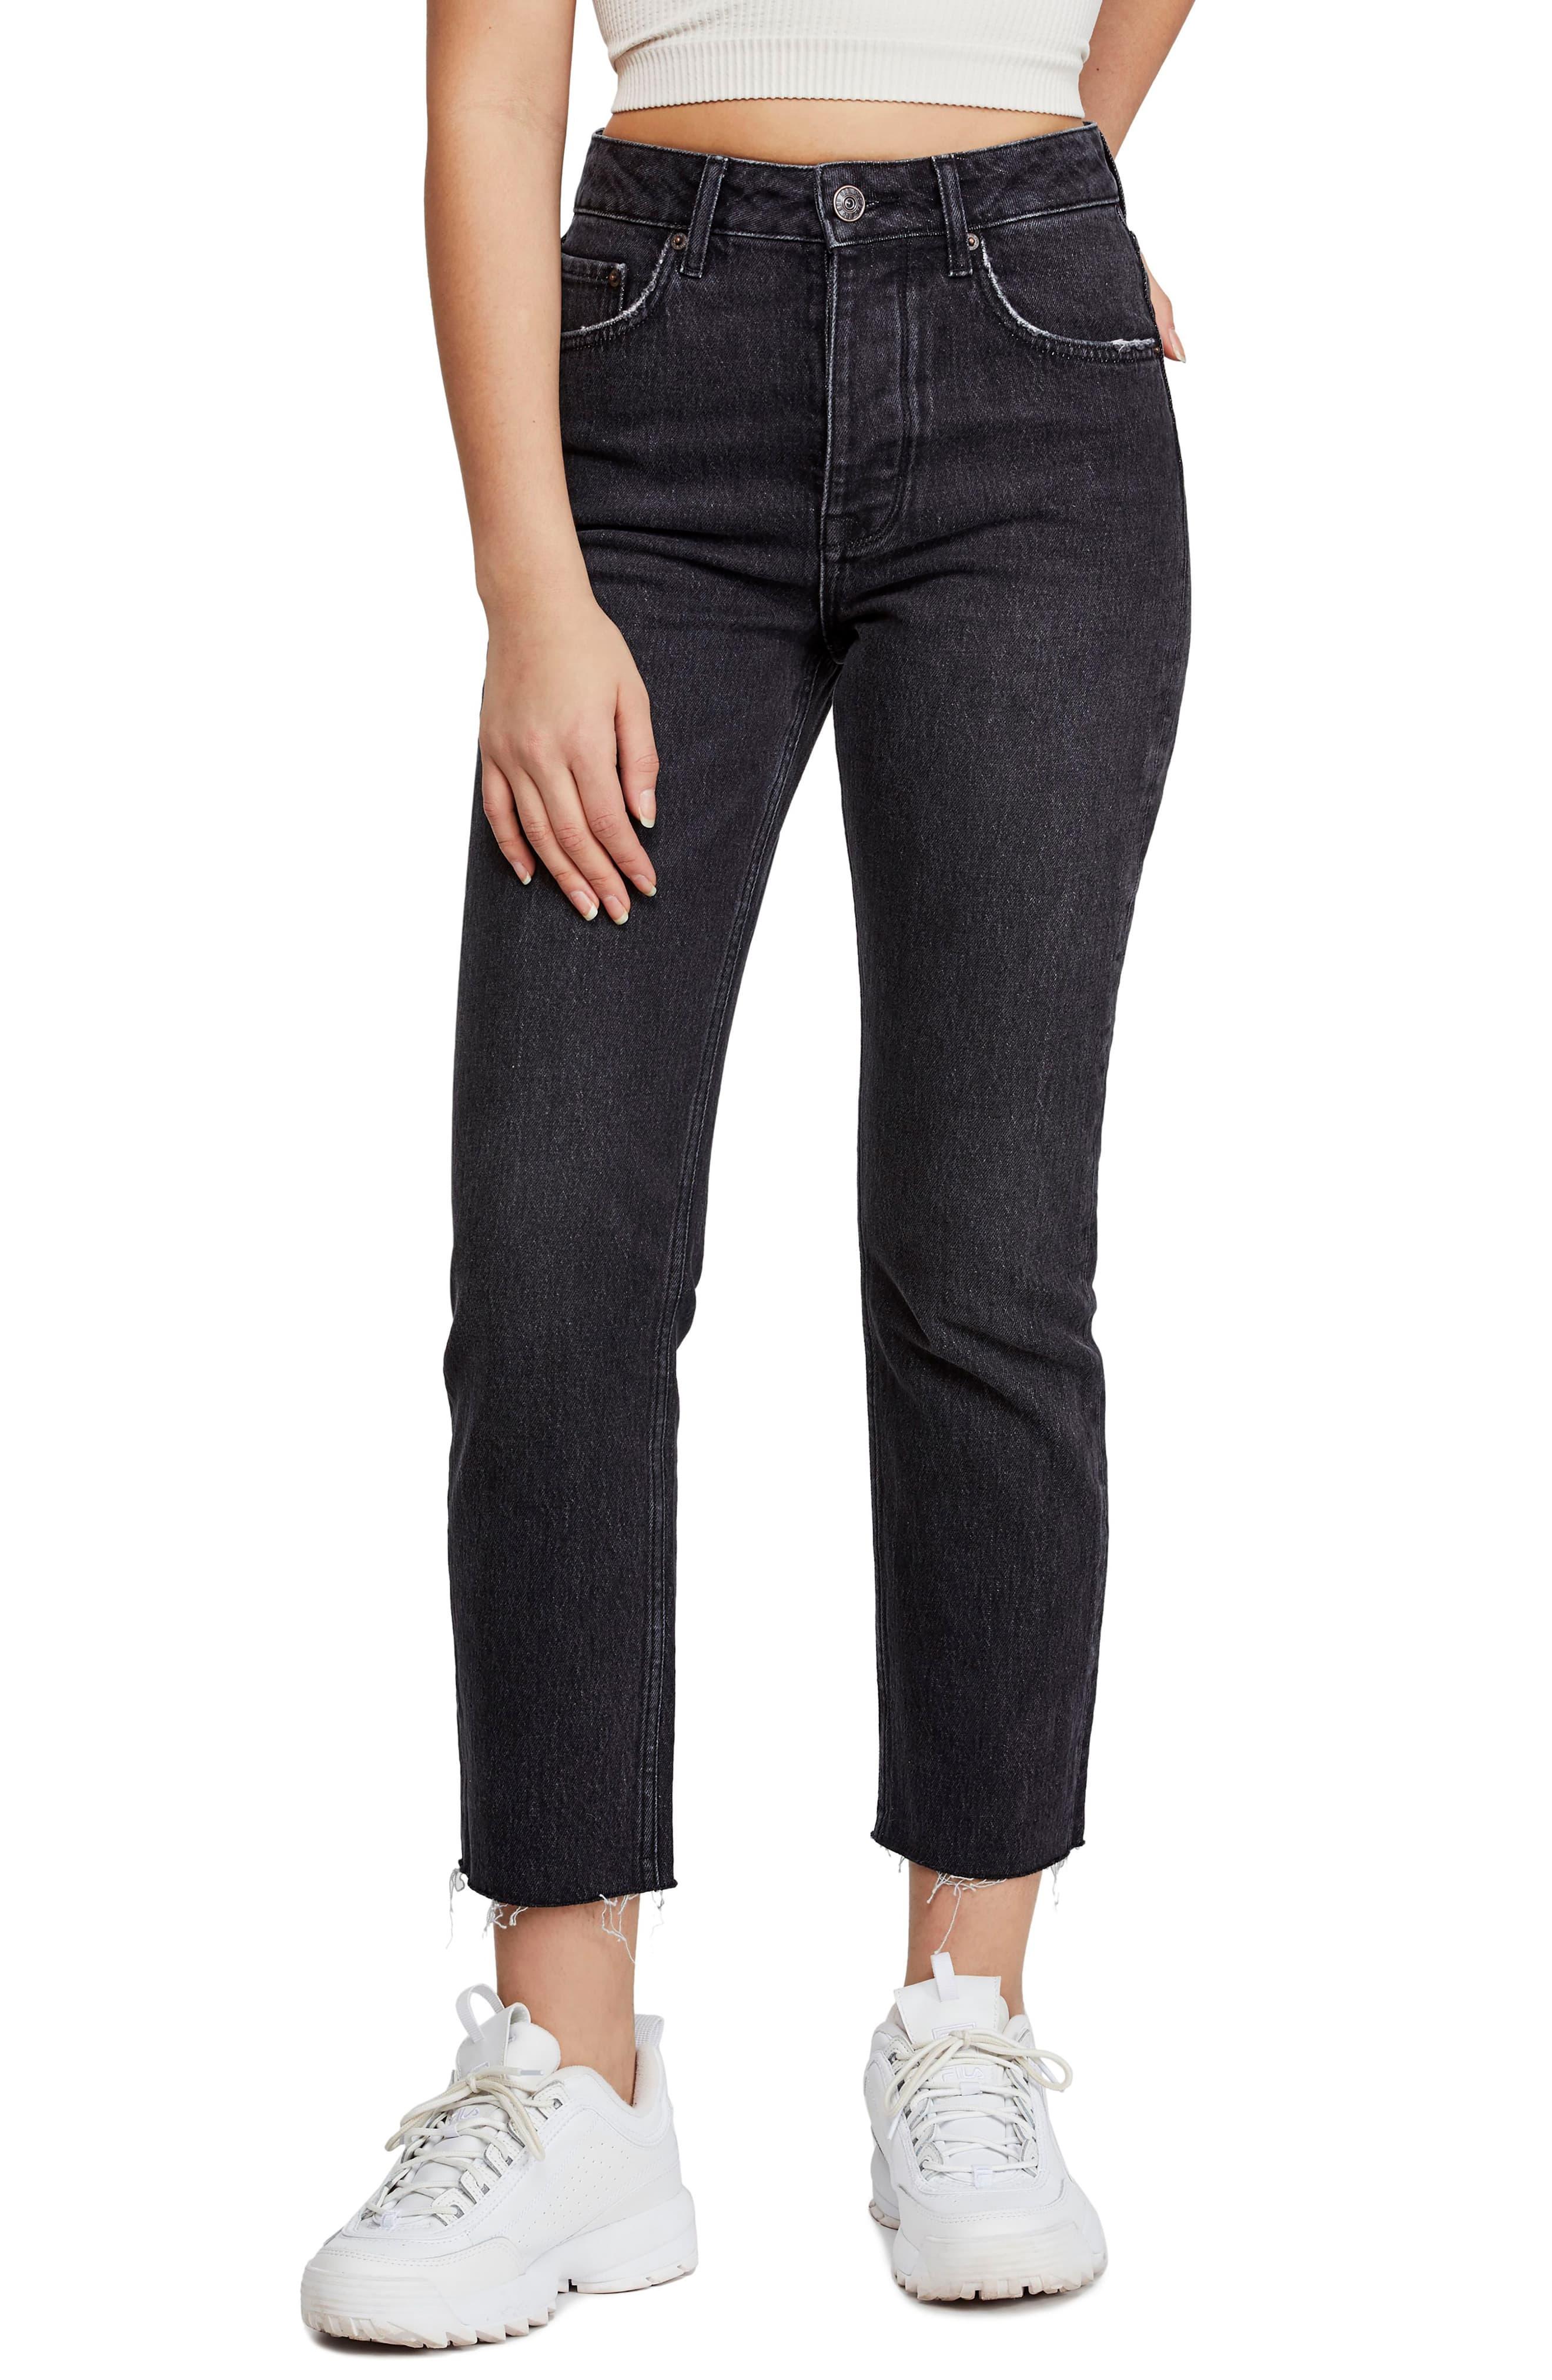 BDG Urban Outfitters Dillon Ankle Straight Leg Jeans in Black - Lyst